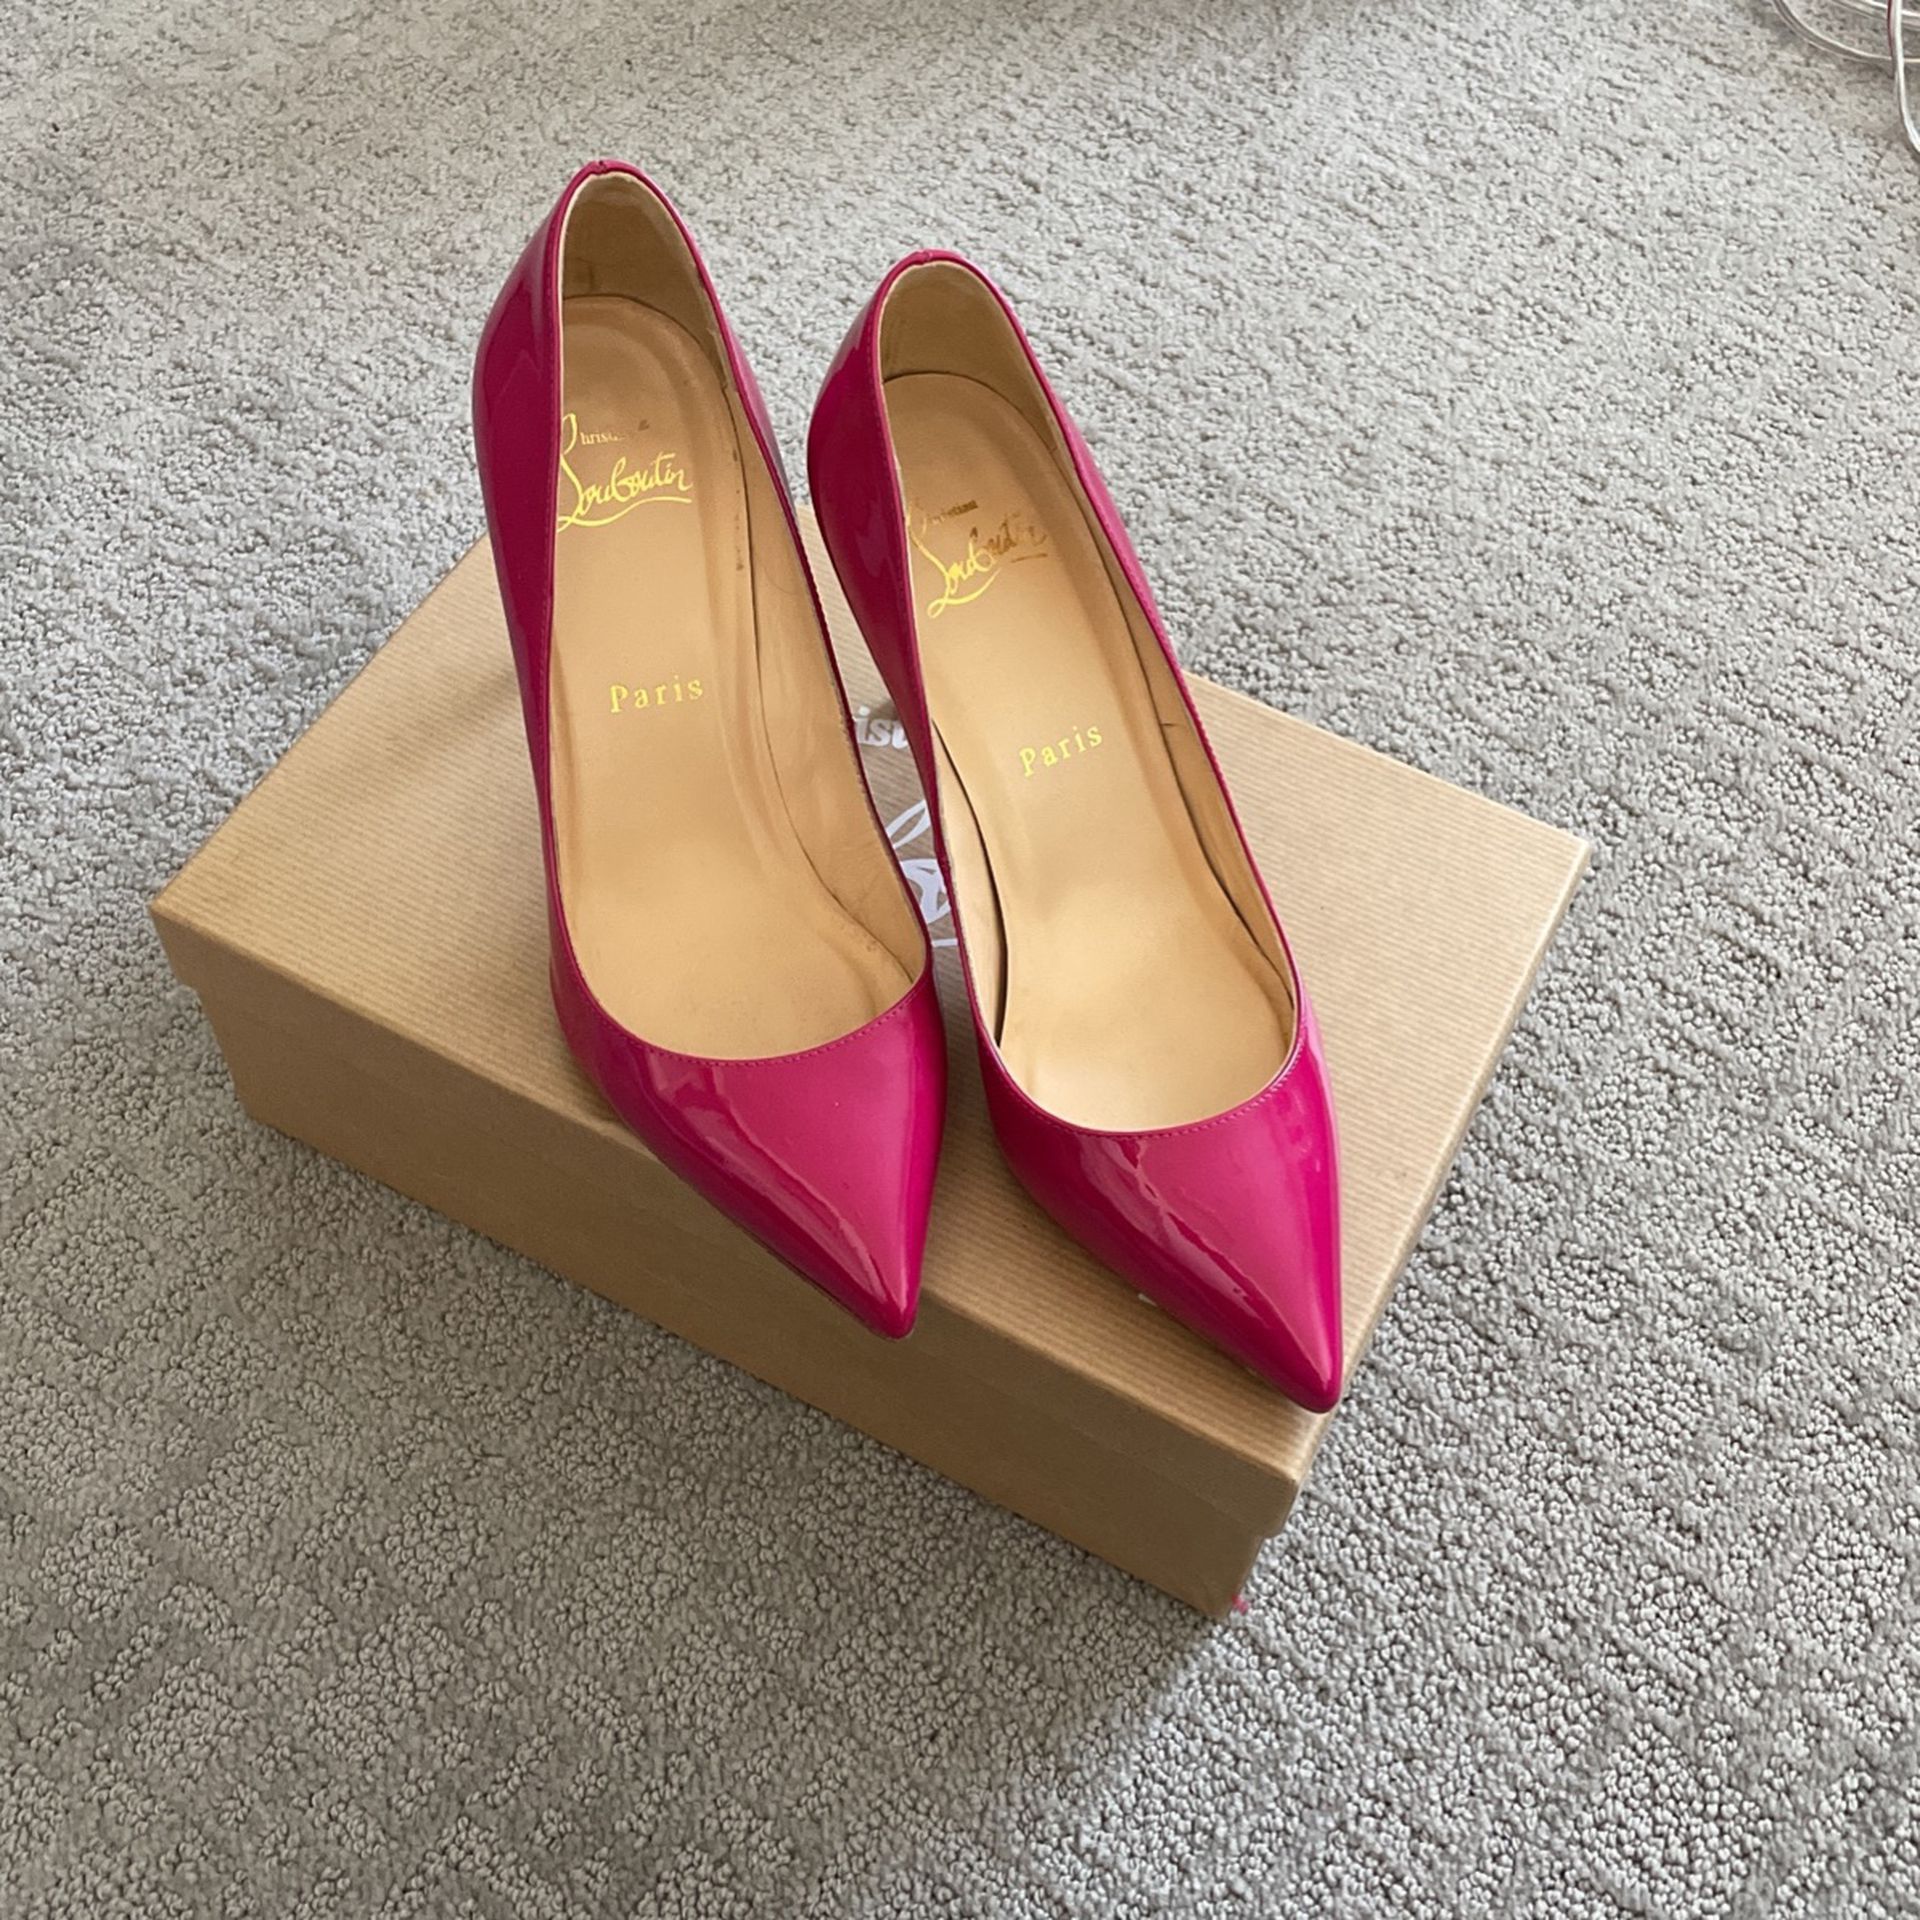 Christian Louboutin Pigalle 85